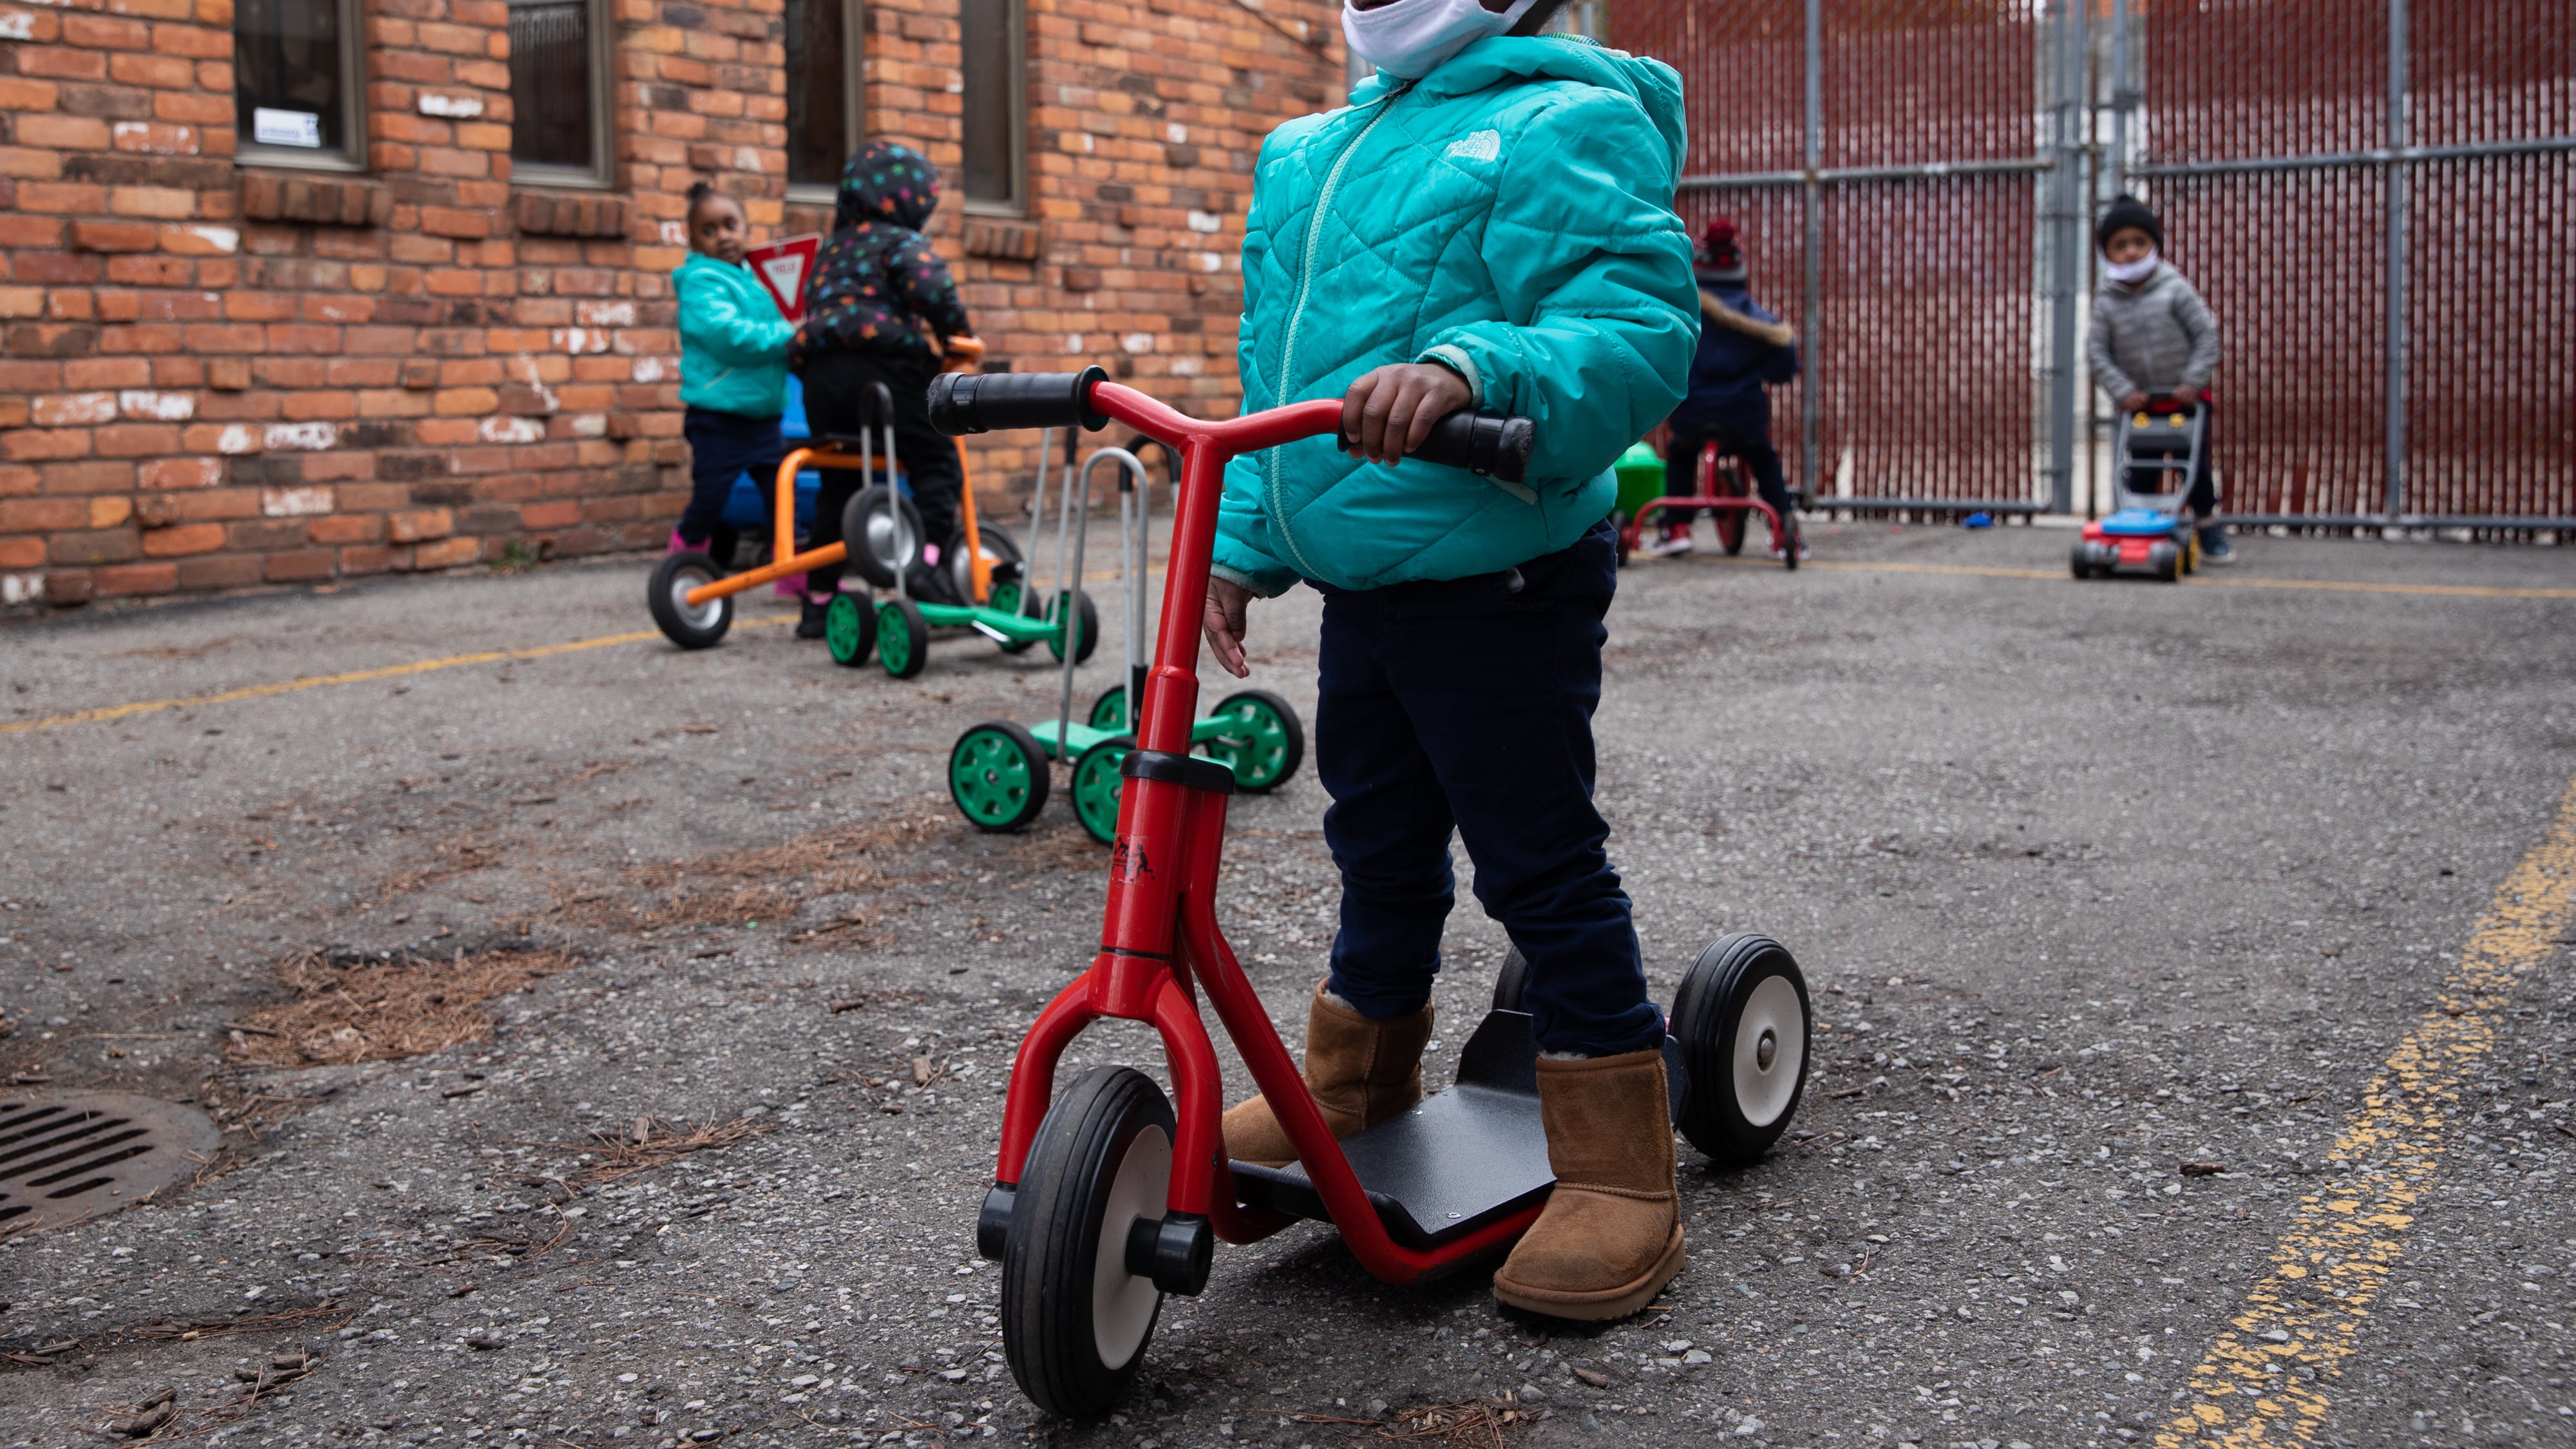 Payton Watson (front) rides around on a scooter as the preschoolers play outside at Little Scholars child care center in Detroit, Michigan, U.S., on Thursday April 1, 2021.